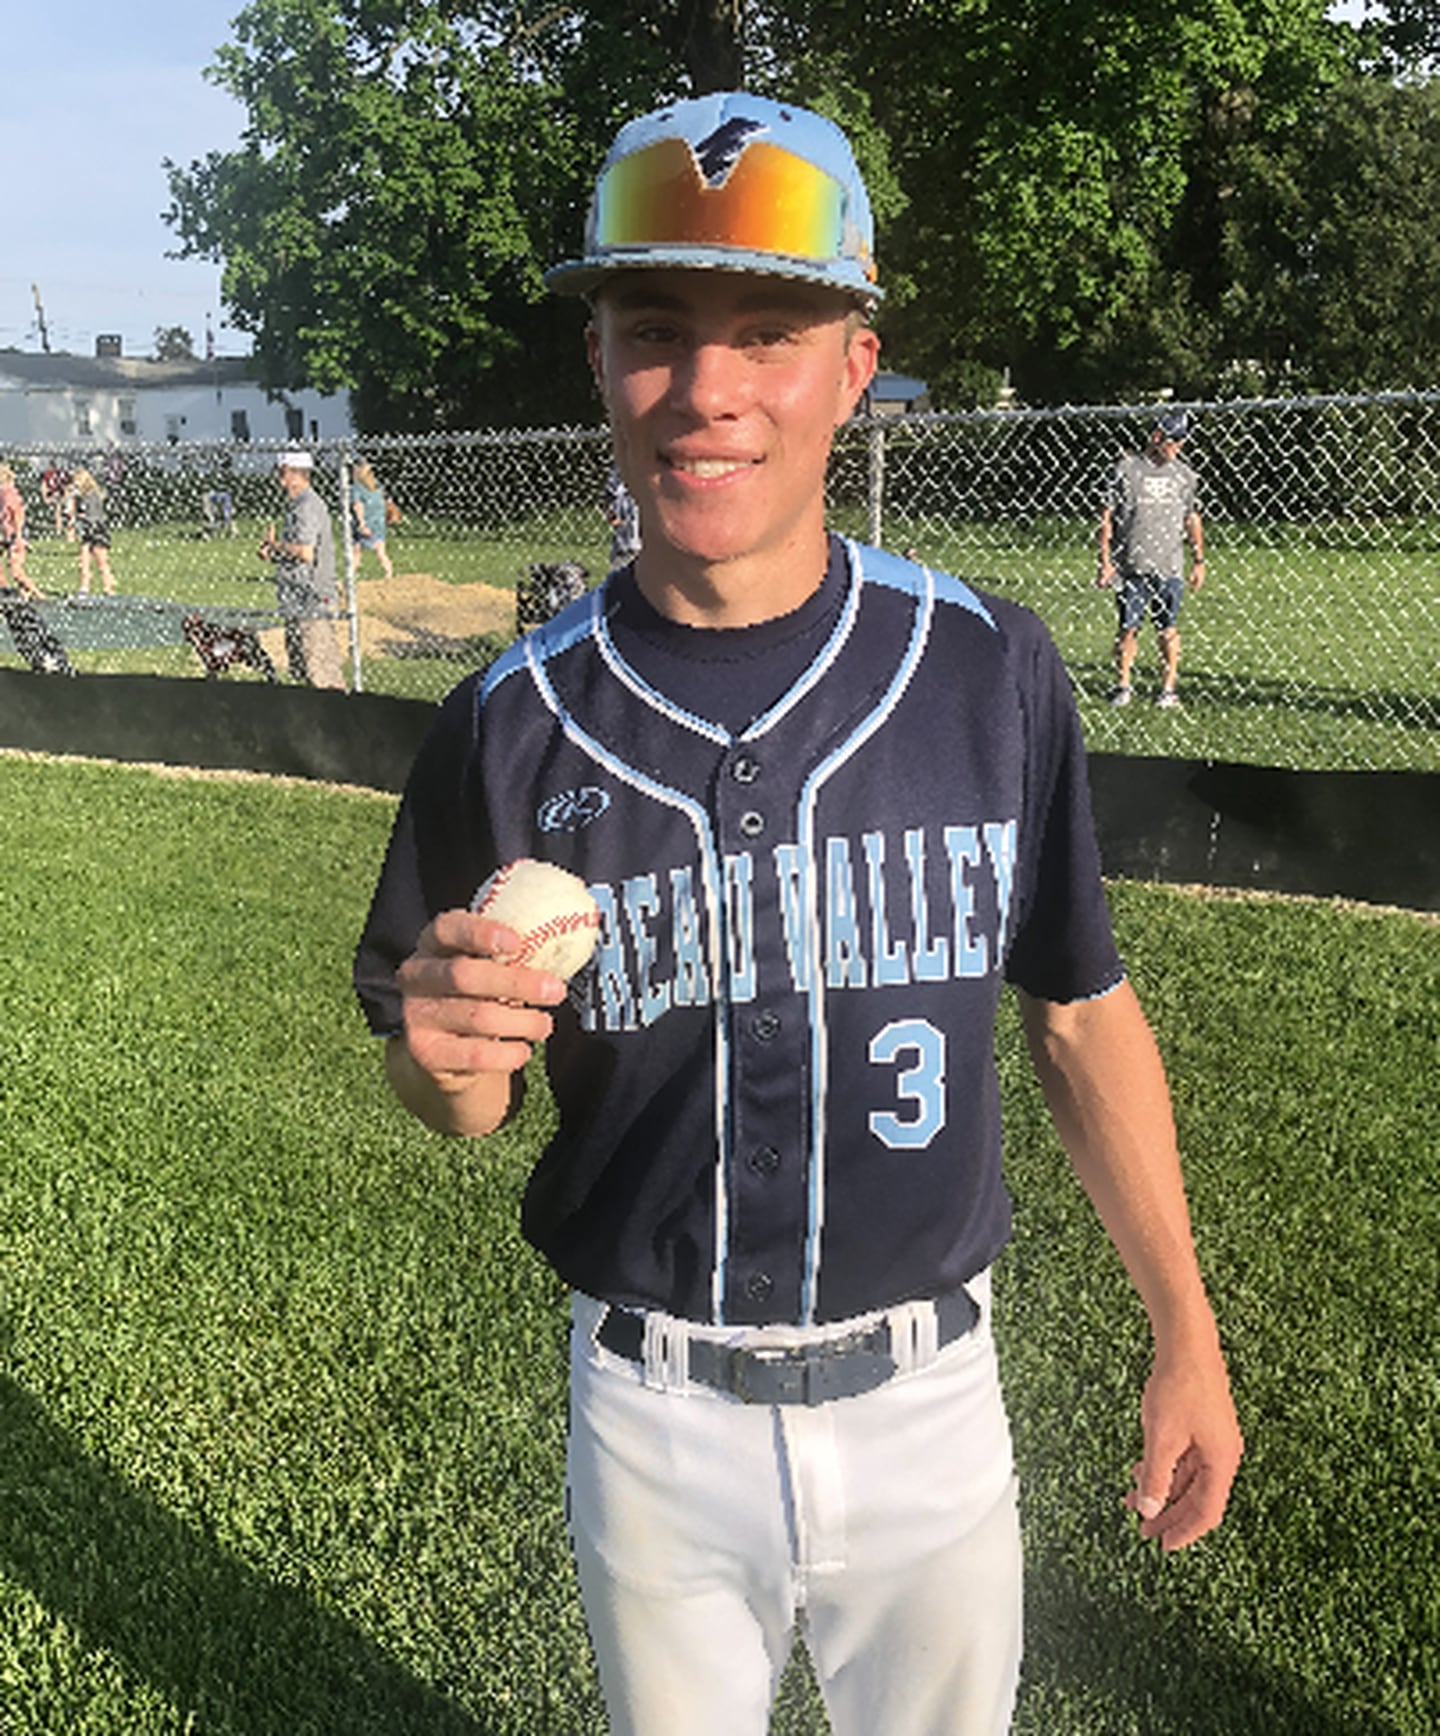 Bureau Valley senior Layton Britt got the Storm's game ball after belting two home runs to lead the Storm to a 5-4 win over Riverdale in the regional semifinals at Princeton Thursday.